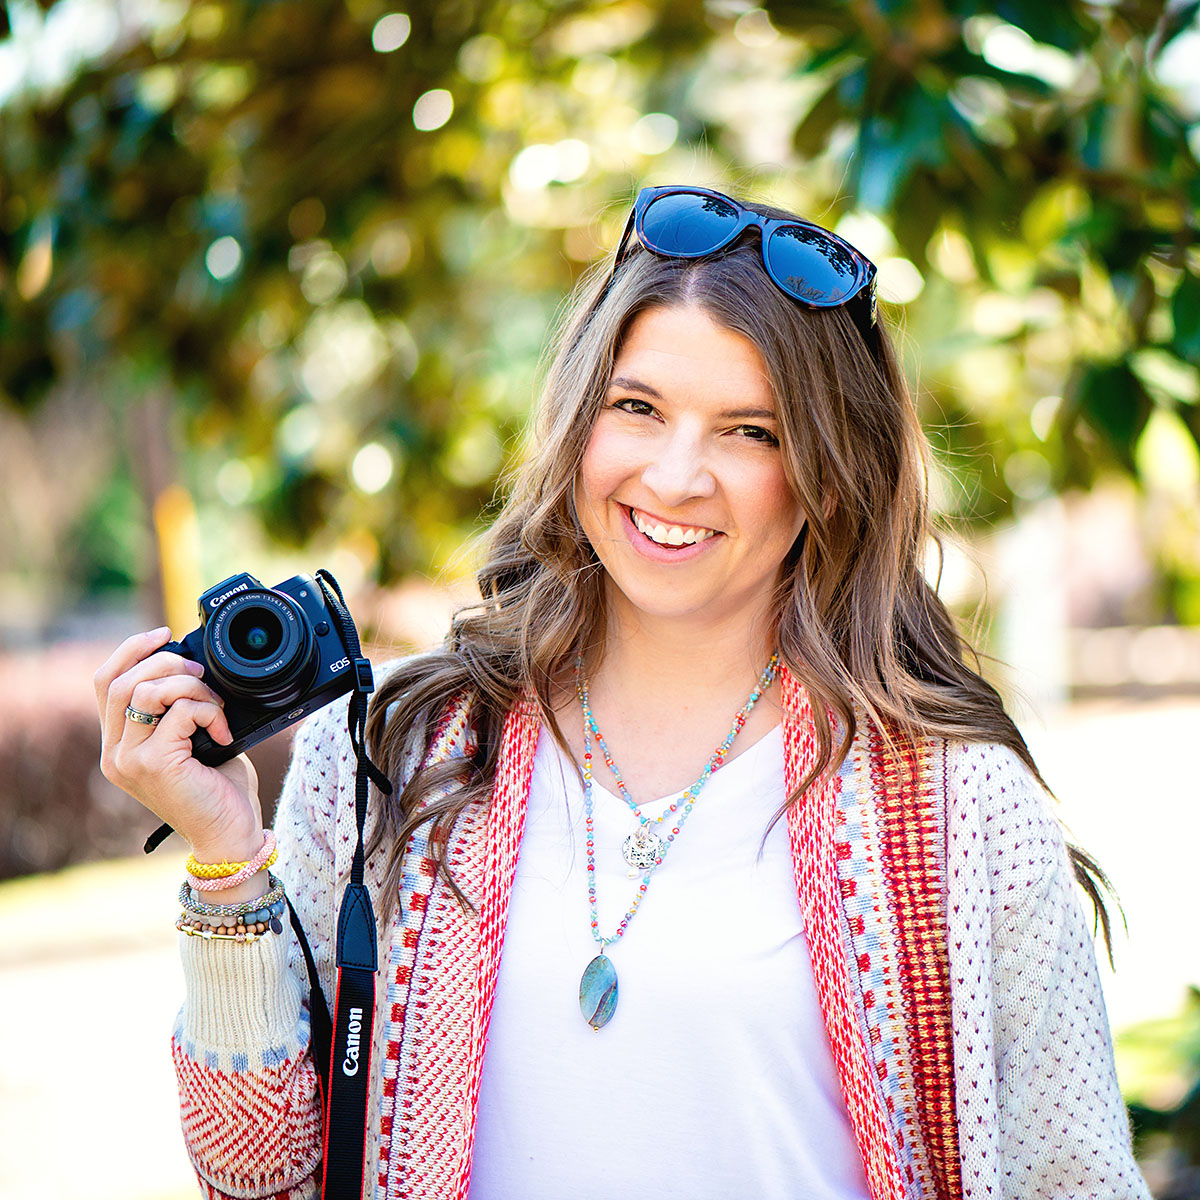 Mirrorless Cameras: Top 6 Reasons You Should Make The Switch This Summer